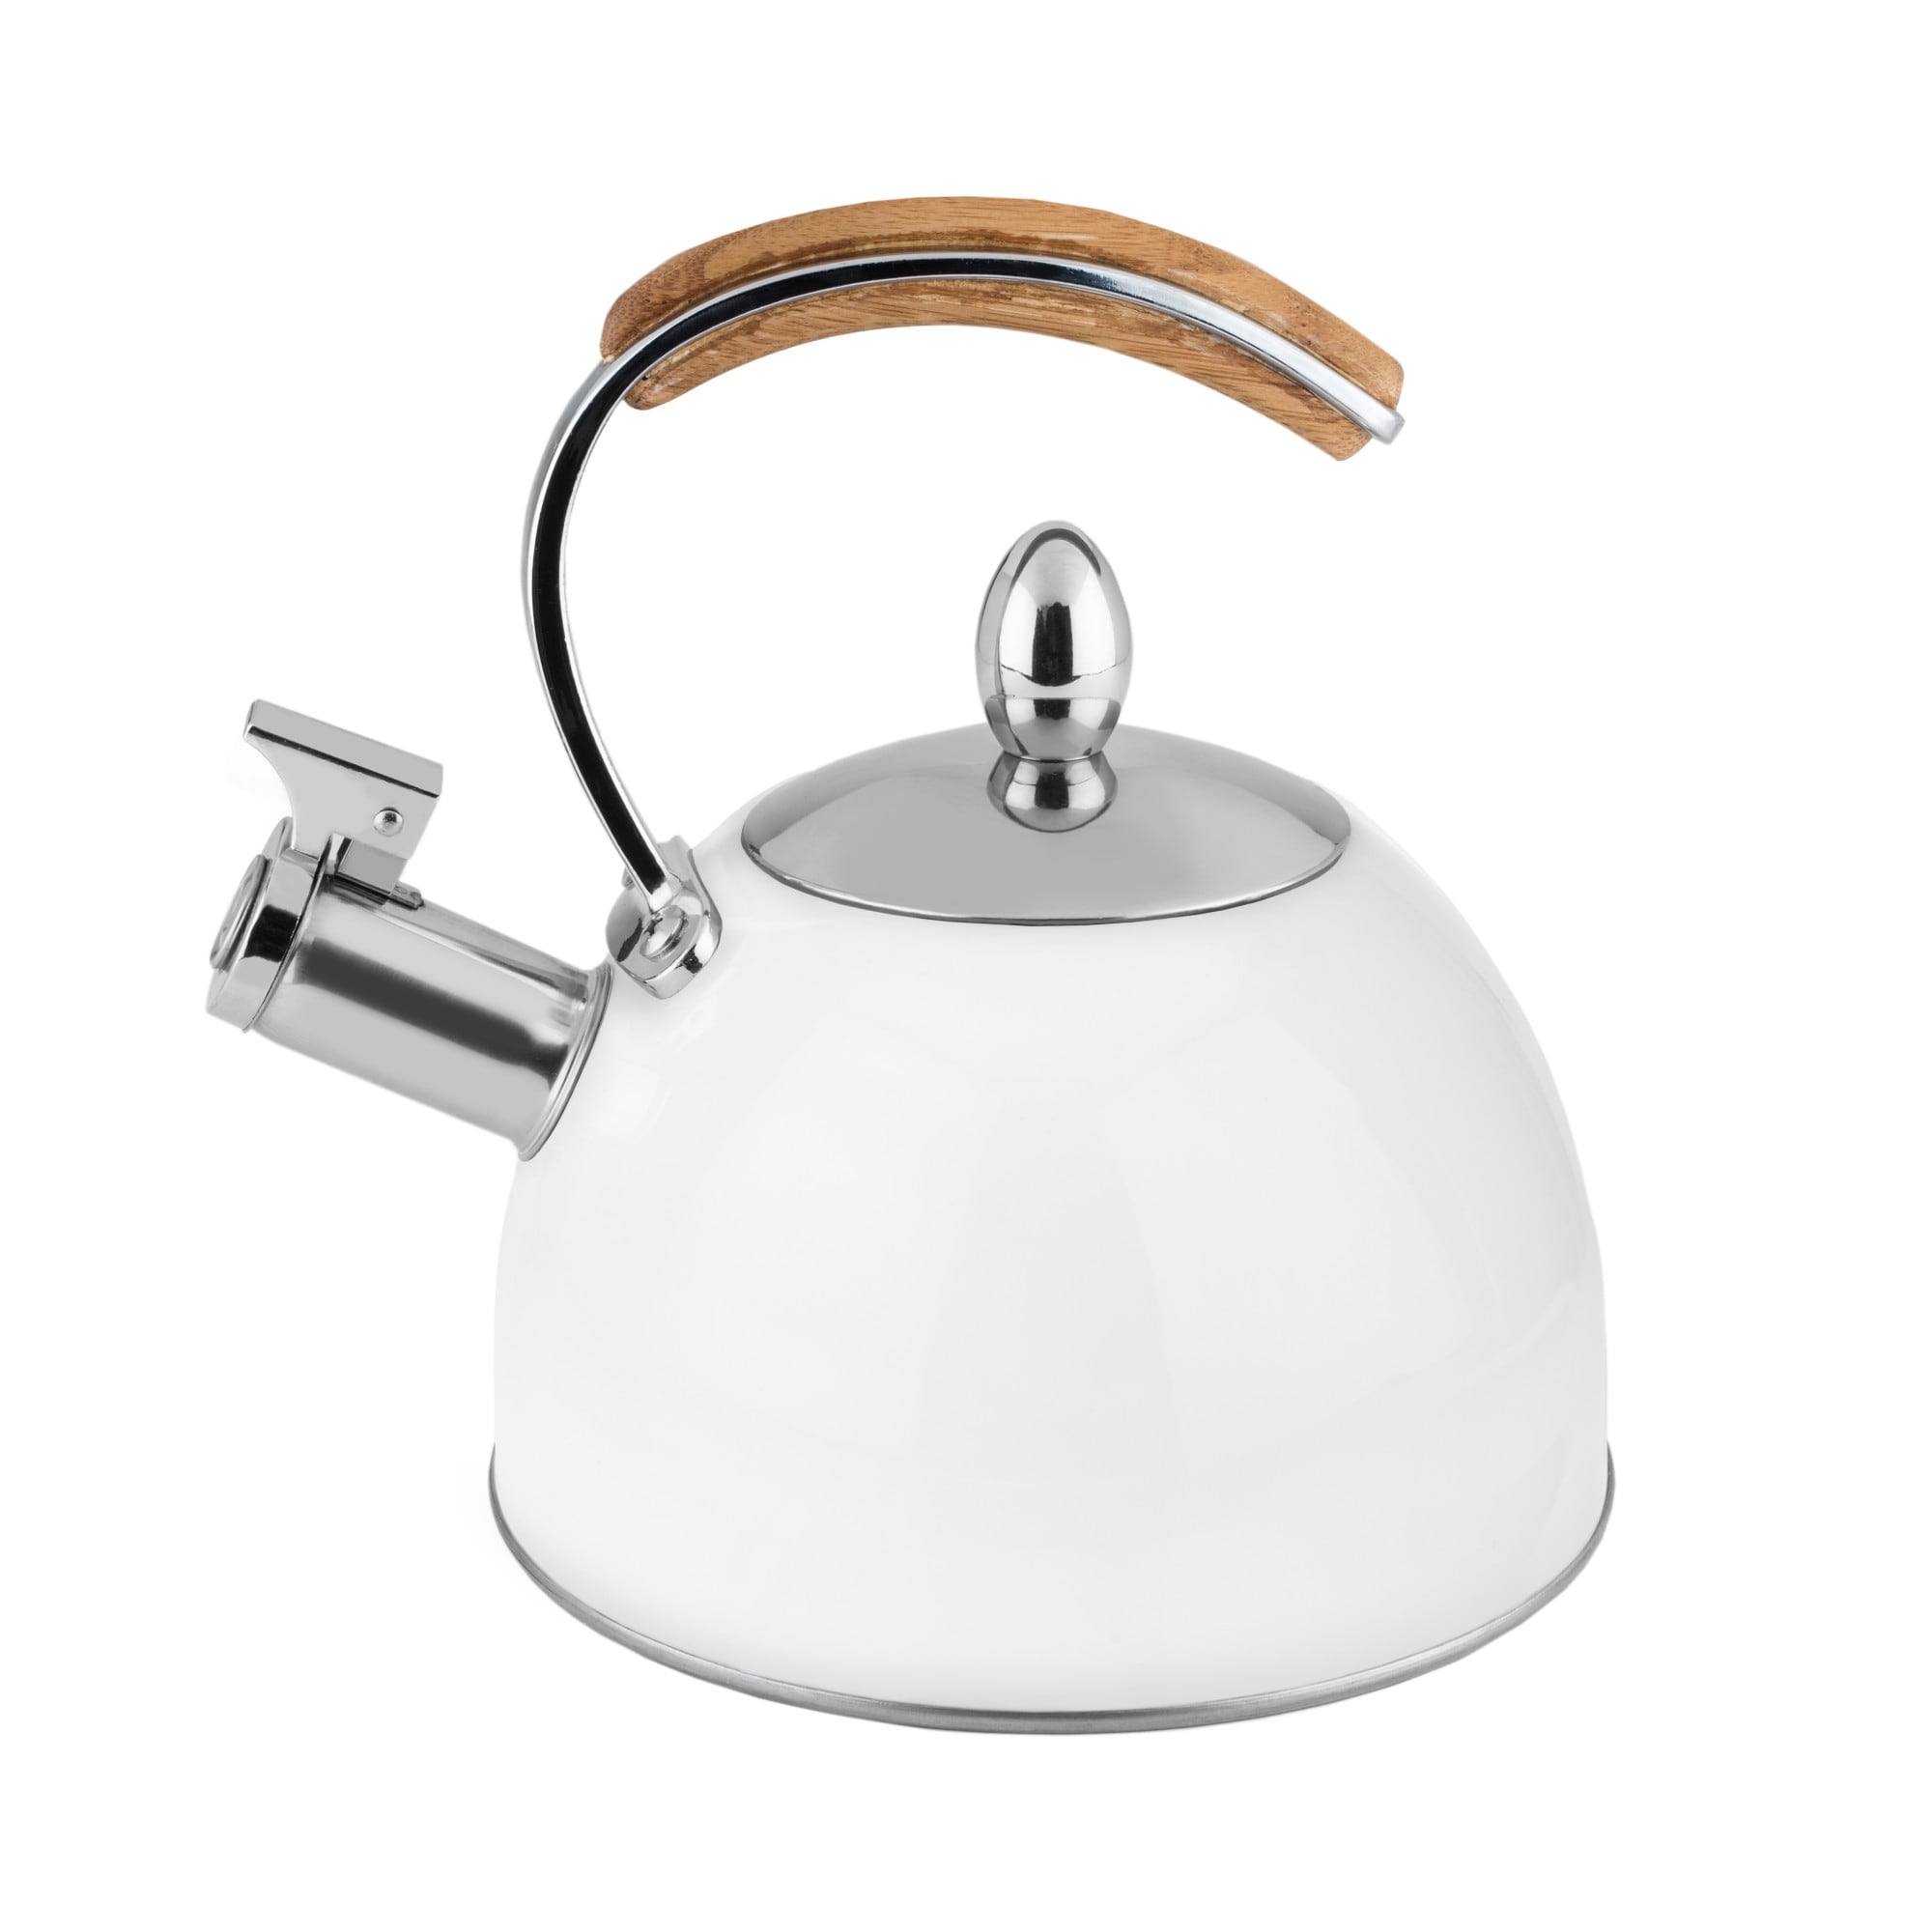 https://ak1.ostkcdn.com/images/products/is/images/direct/994d34e7a889189ef4197115a0ab38c859d912b3/Presley-White-Tea-Kettle-by-Pinky-Up.jpg